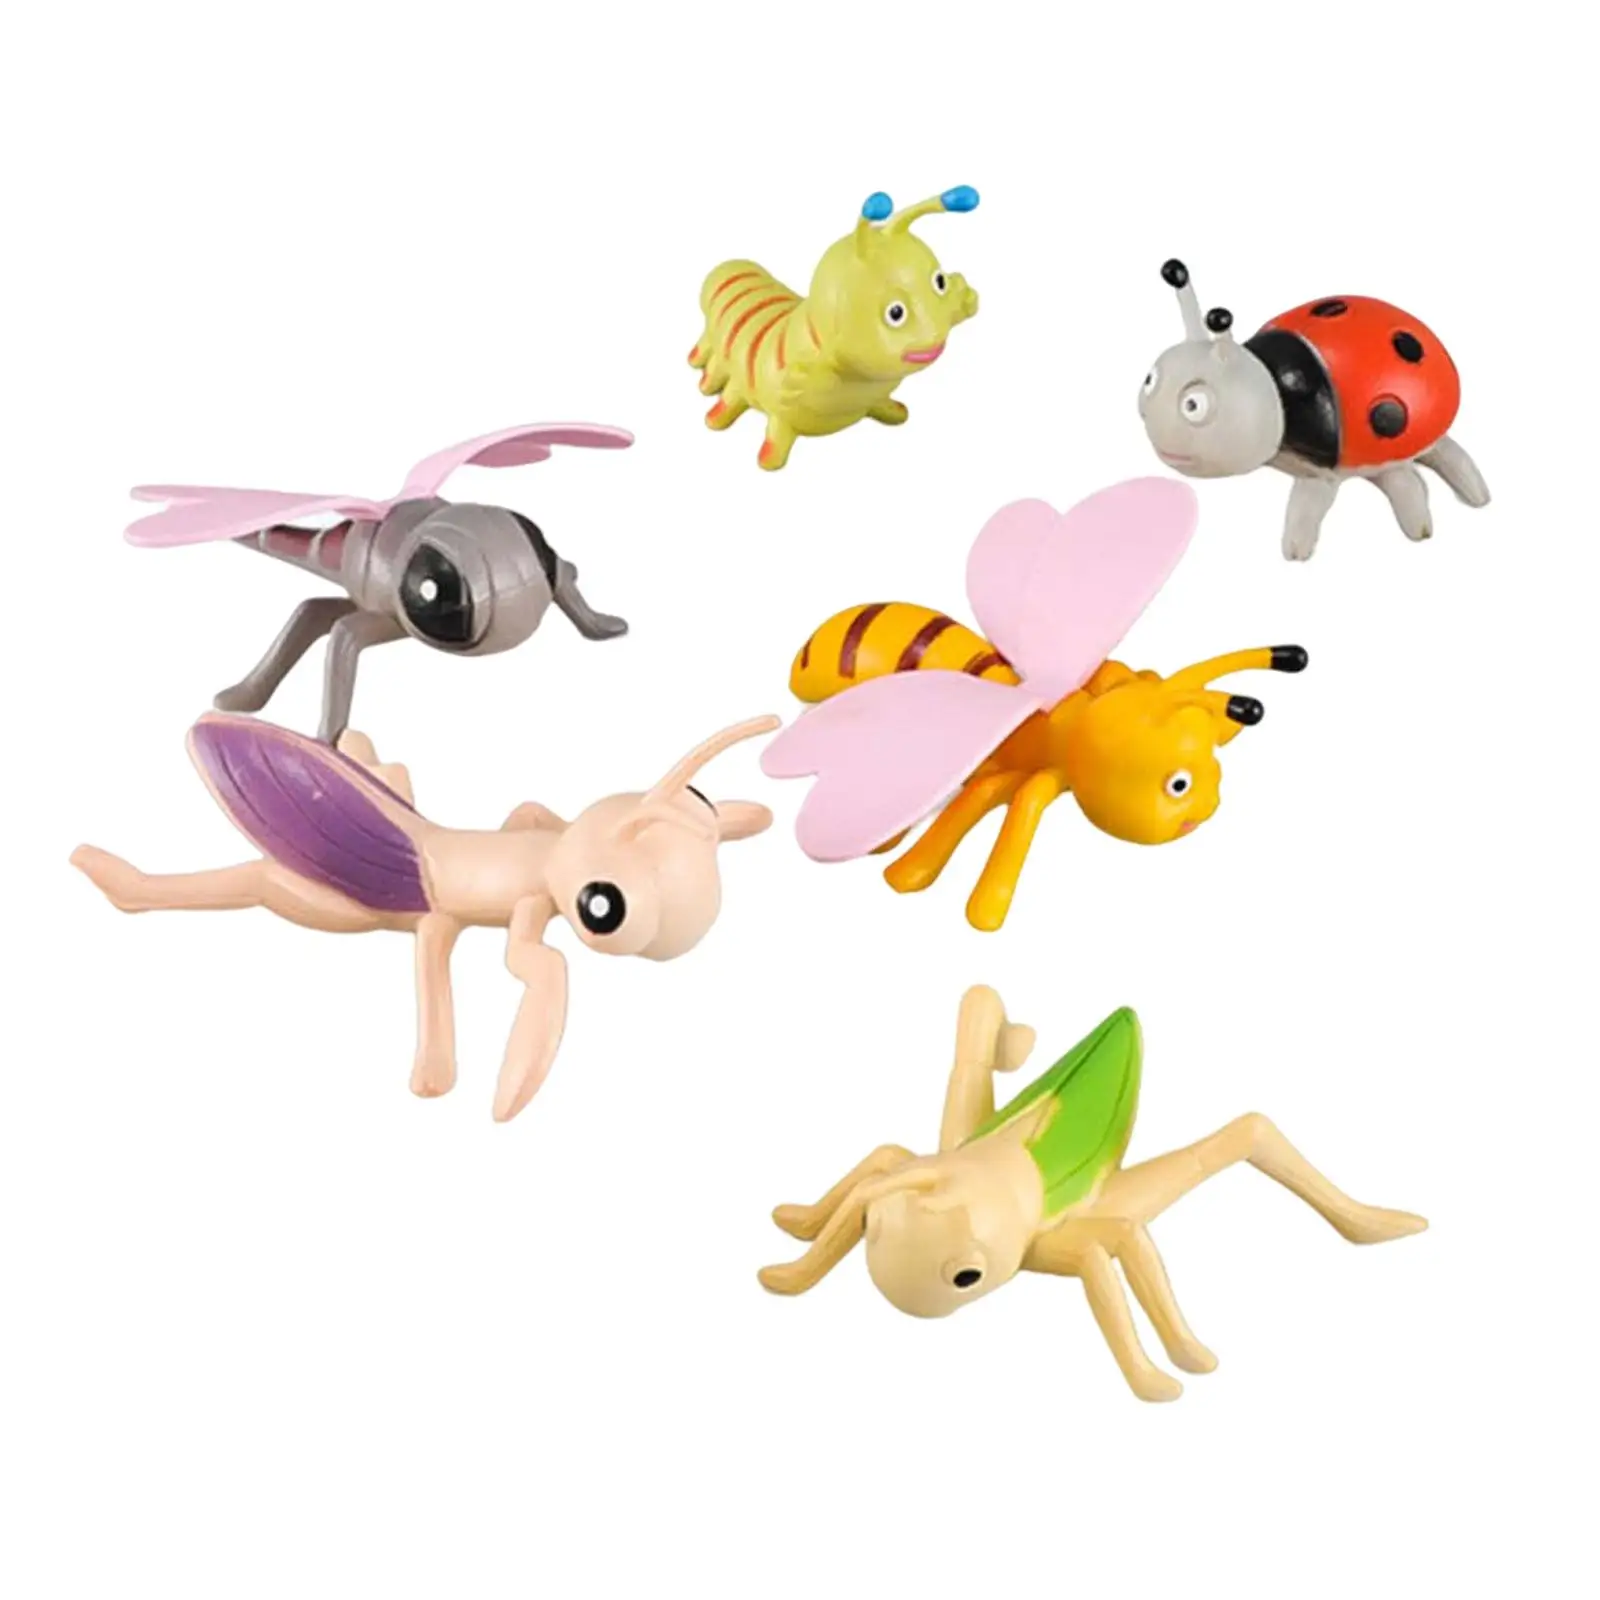 6Pcs Artifical Animal Model Toy for Toddler Educational Toys High Simulation